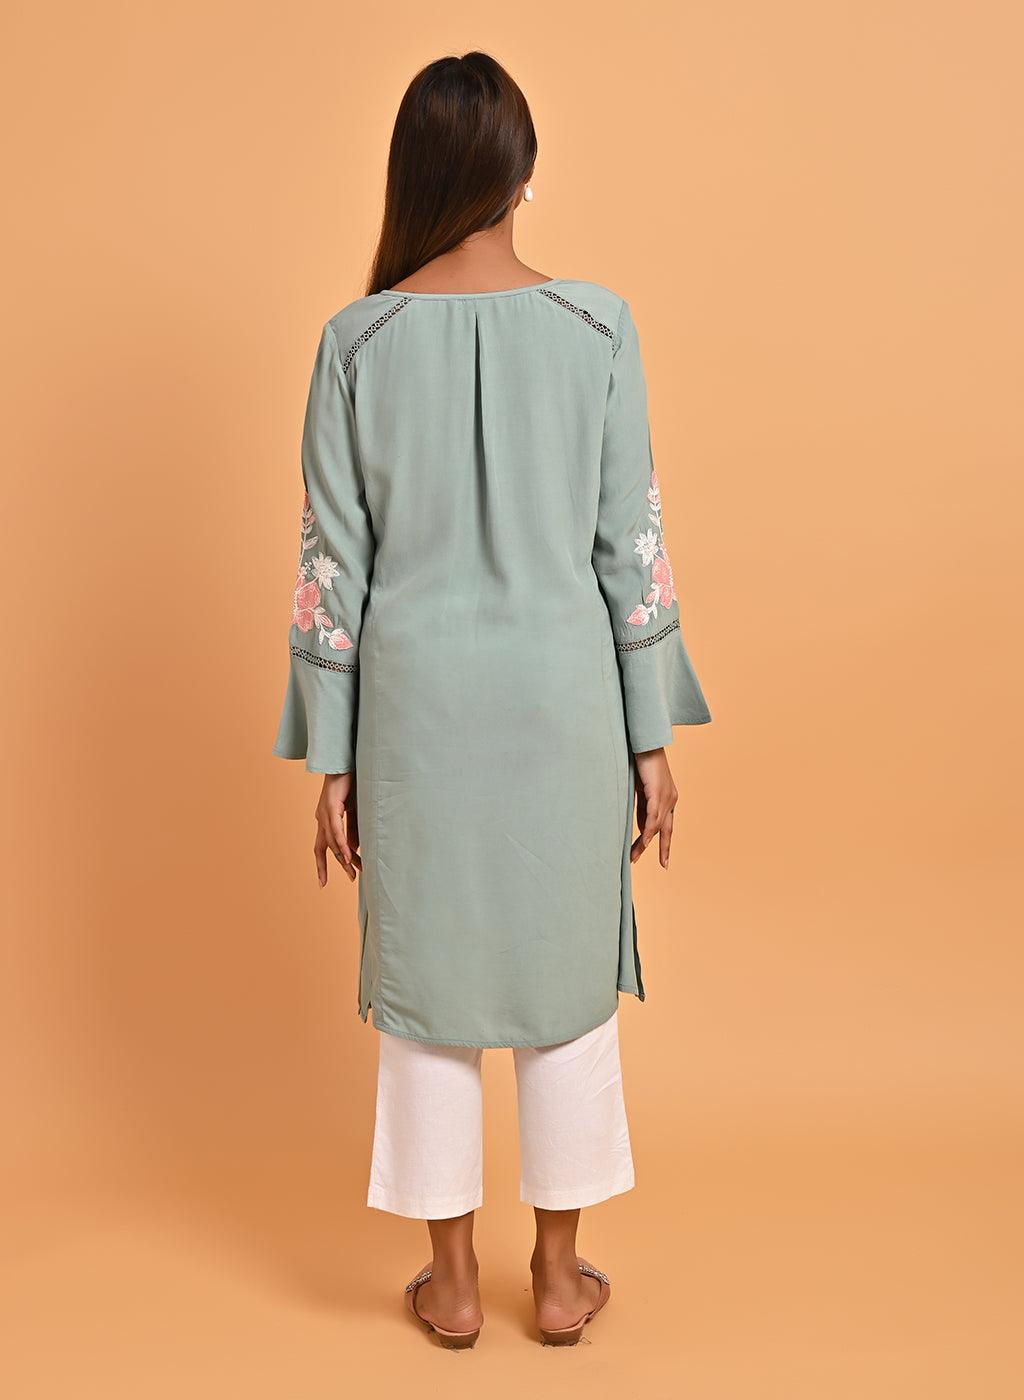 Spa Blue Patchwork Embroidered Tunic with Asymmetrical Hemline - Lakshita